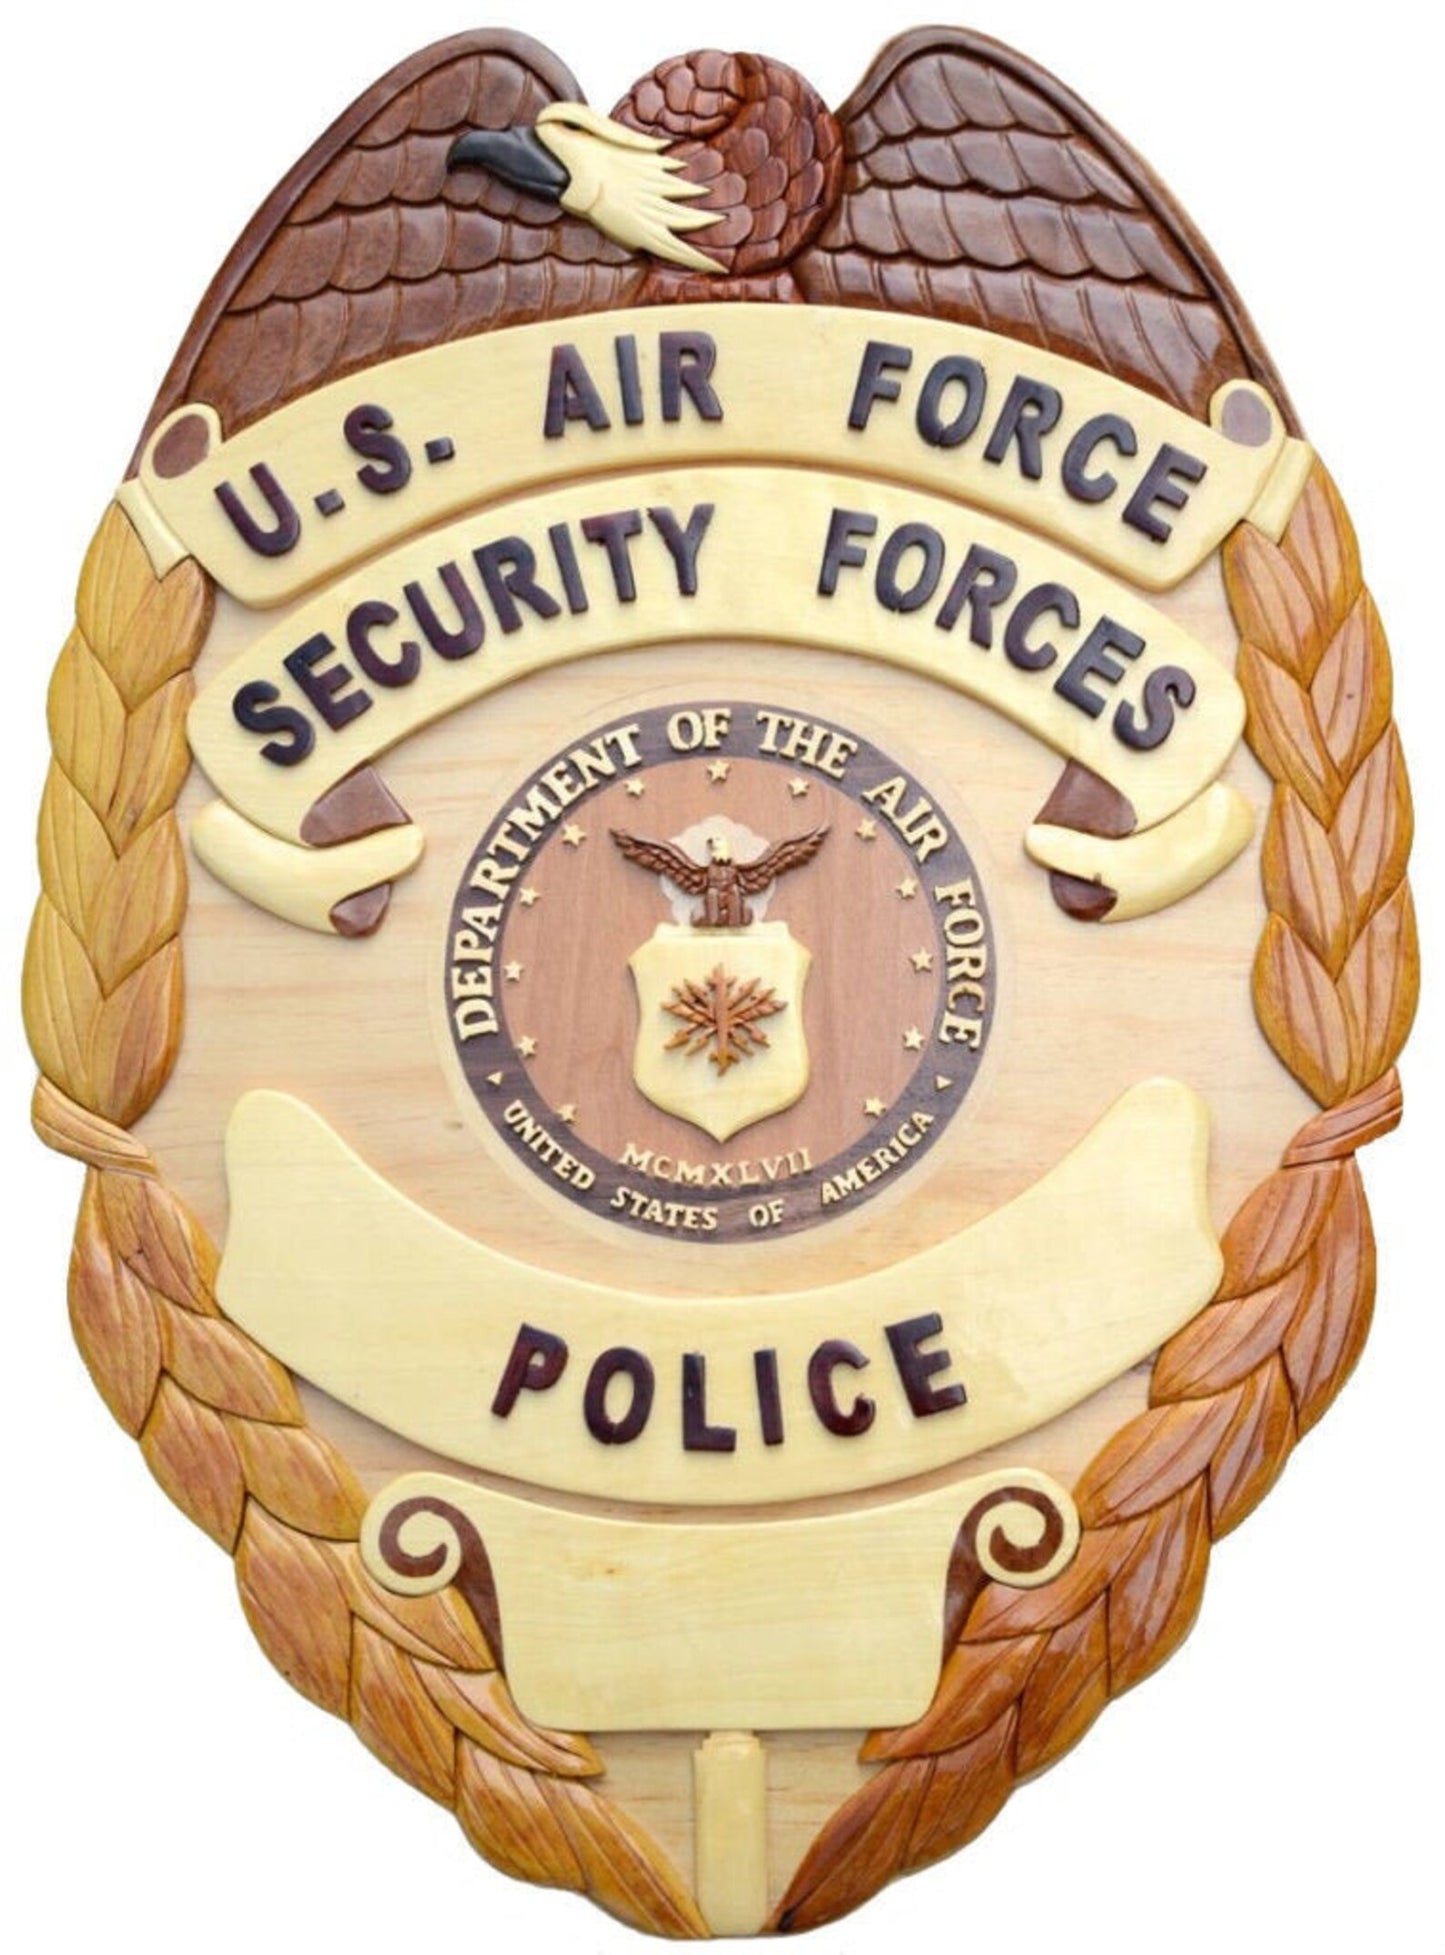 AIR FORCE DAF SECURITY FORCES POLICE BADGE